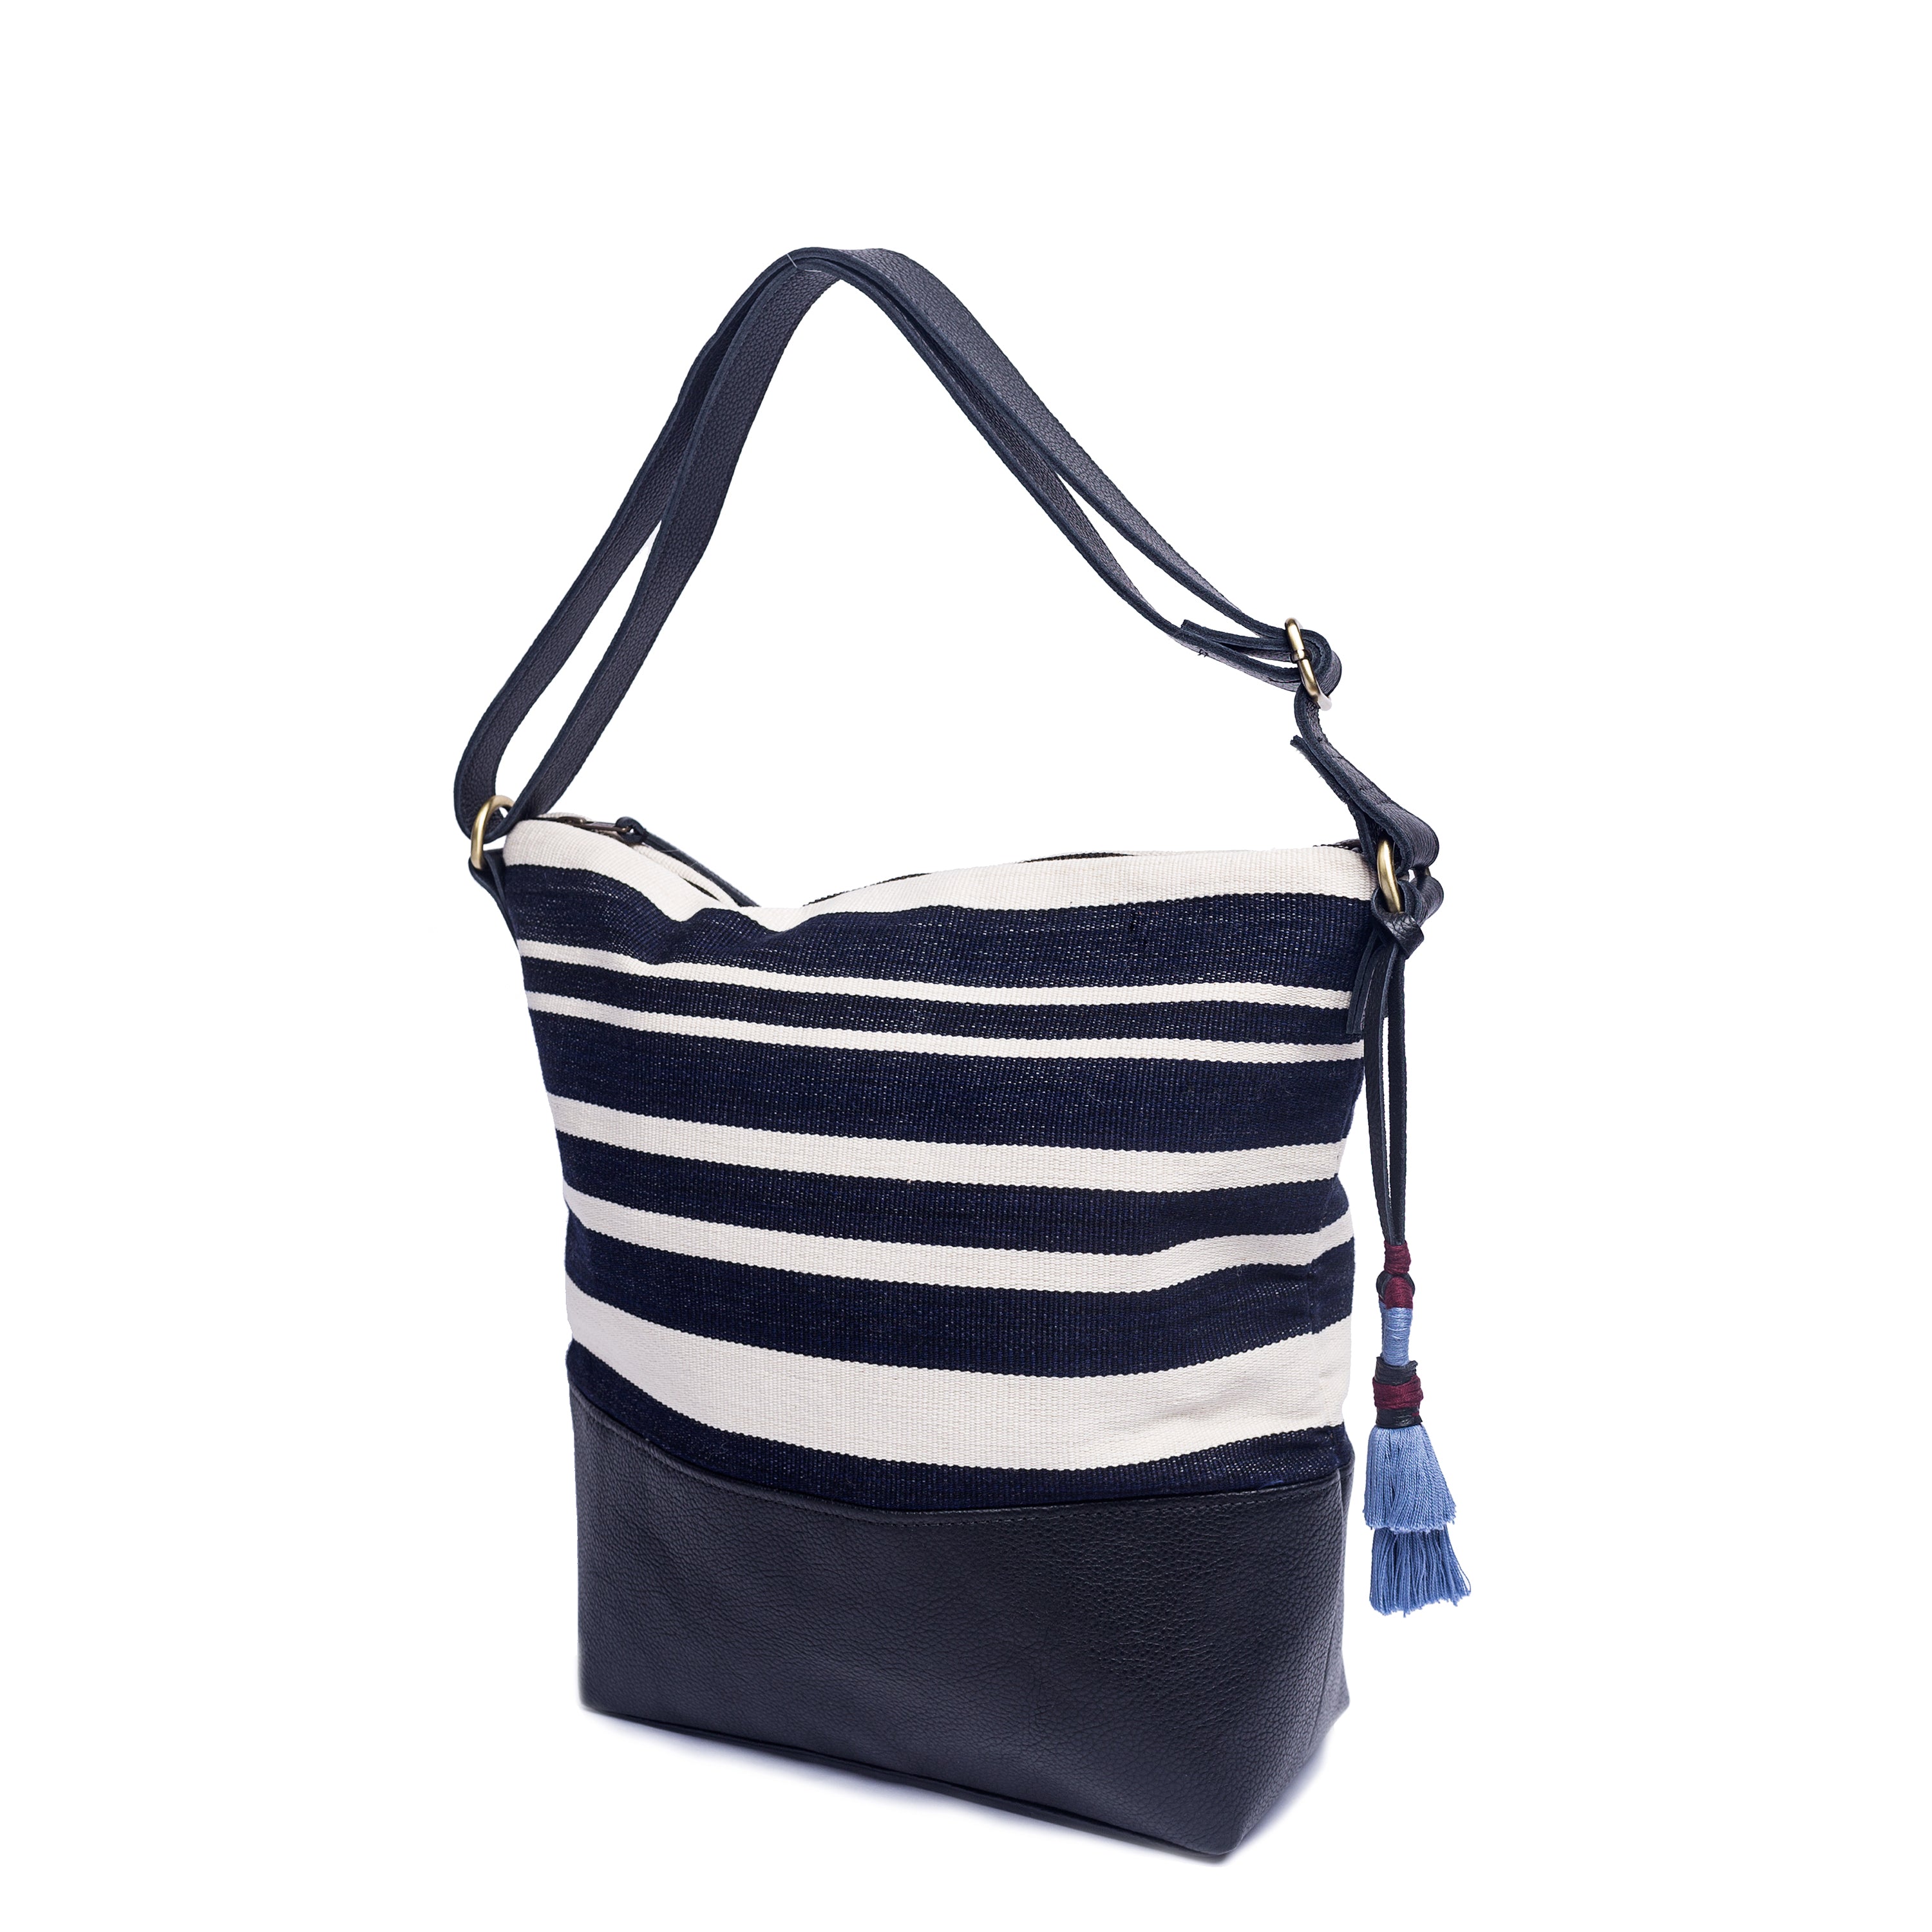 Hand Woven Artisan Lidia Hobo Shoulder Bag Midnight Black. The Midnight Black pattern has vertical navy blue and white stripes. It has a navy adjustable leather strap, a leather bottom lining, and a blue tassel.